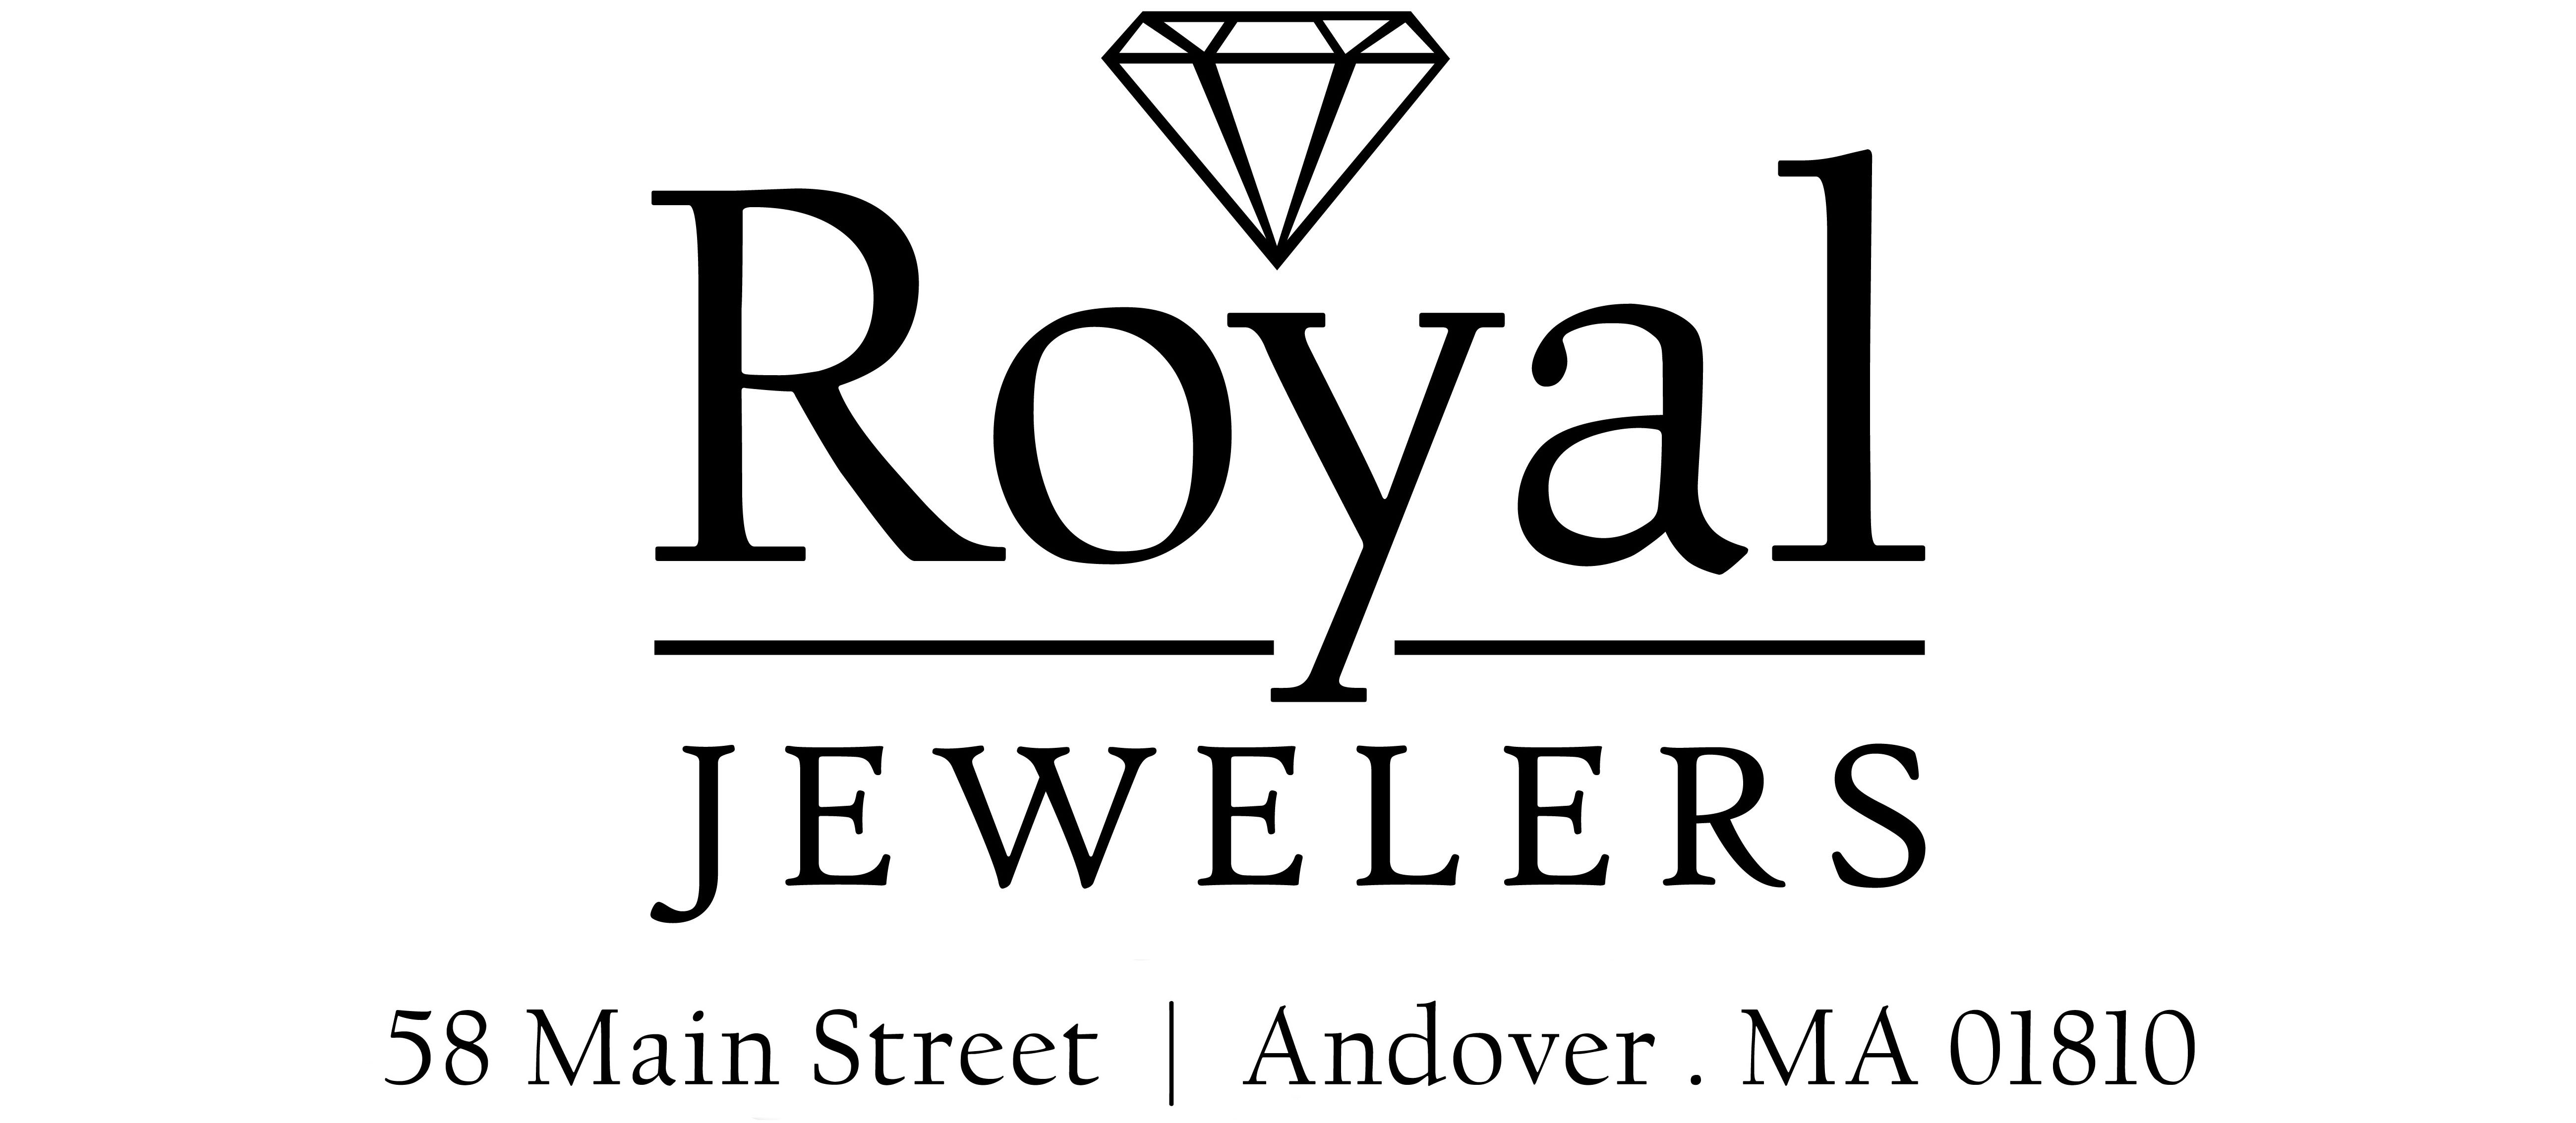 Royal Jewelers in Andover Massachusetts Named By Luxury Magazine As One ...